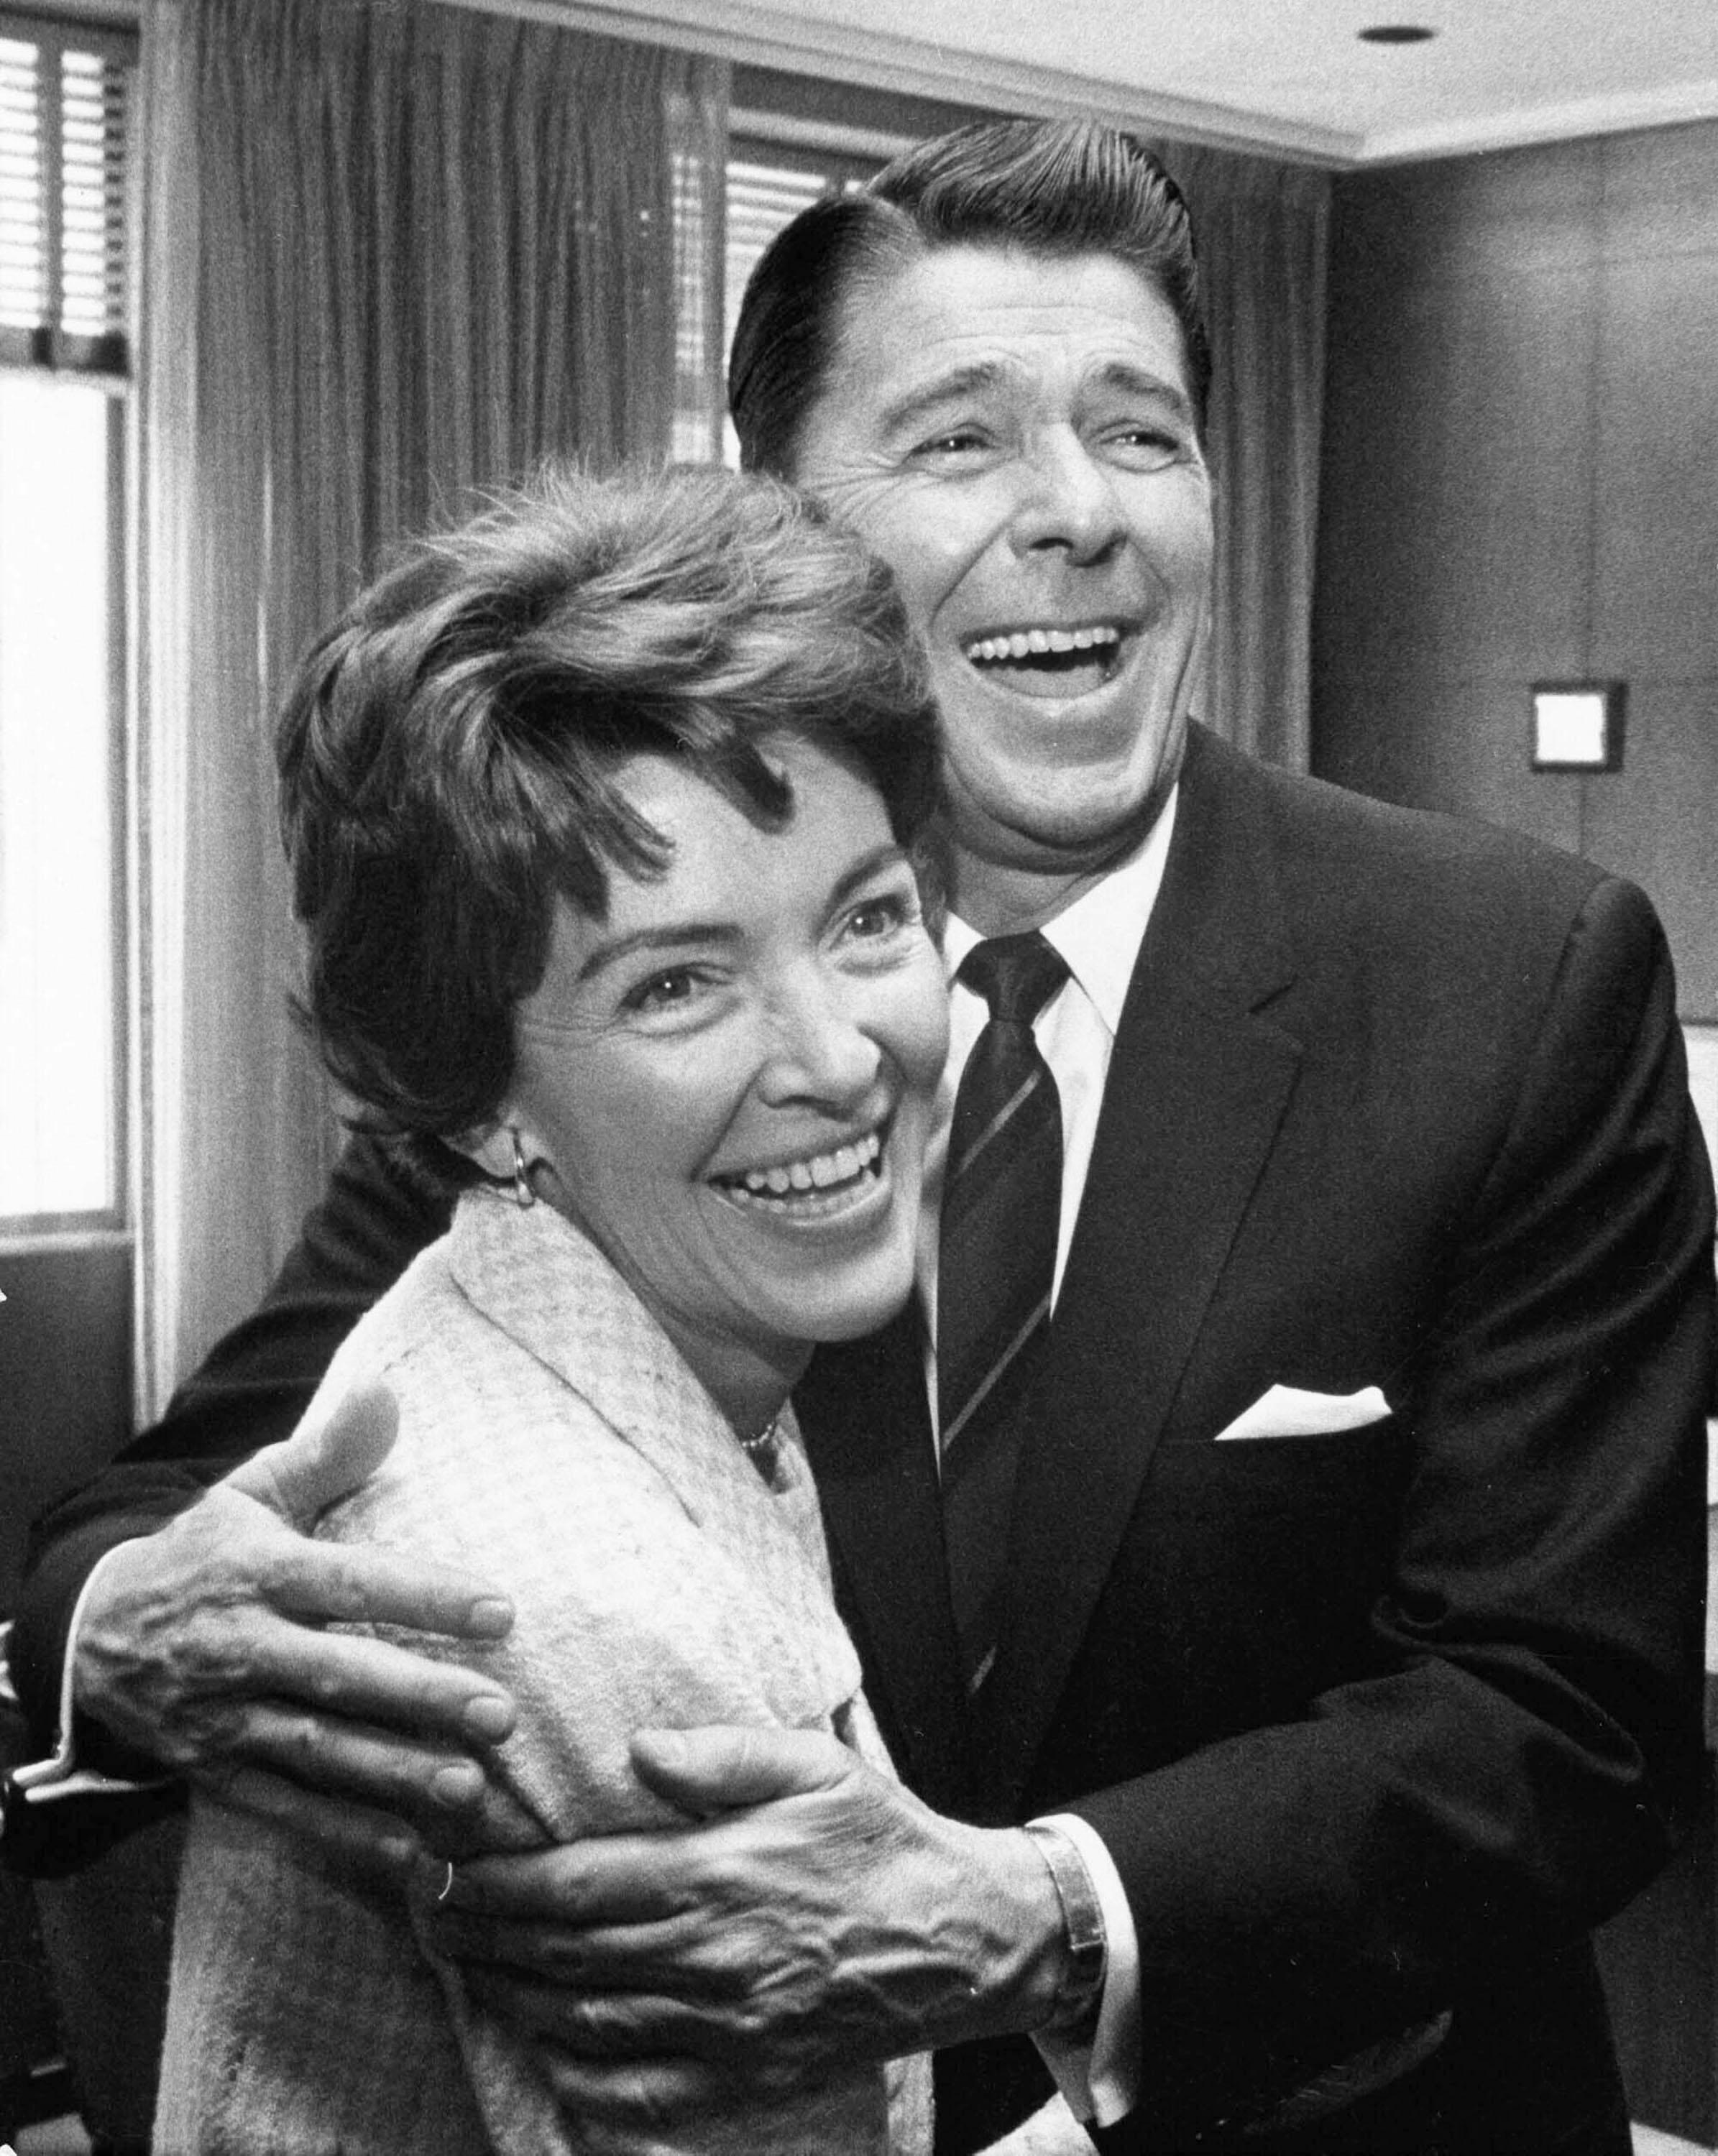 Nancy Reagan history the real story of her time in Hollywood. photo pic